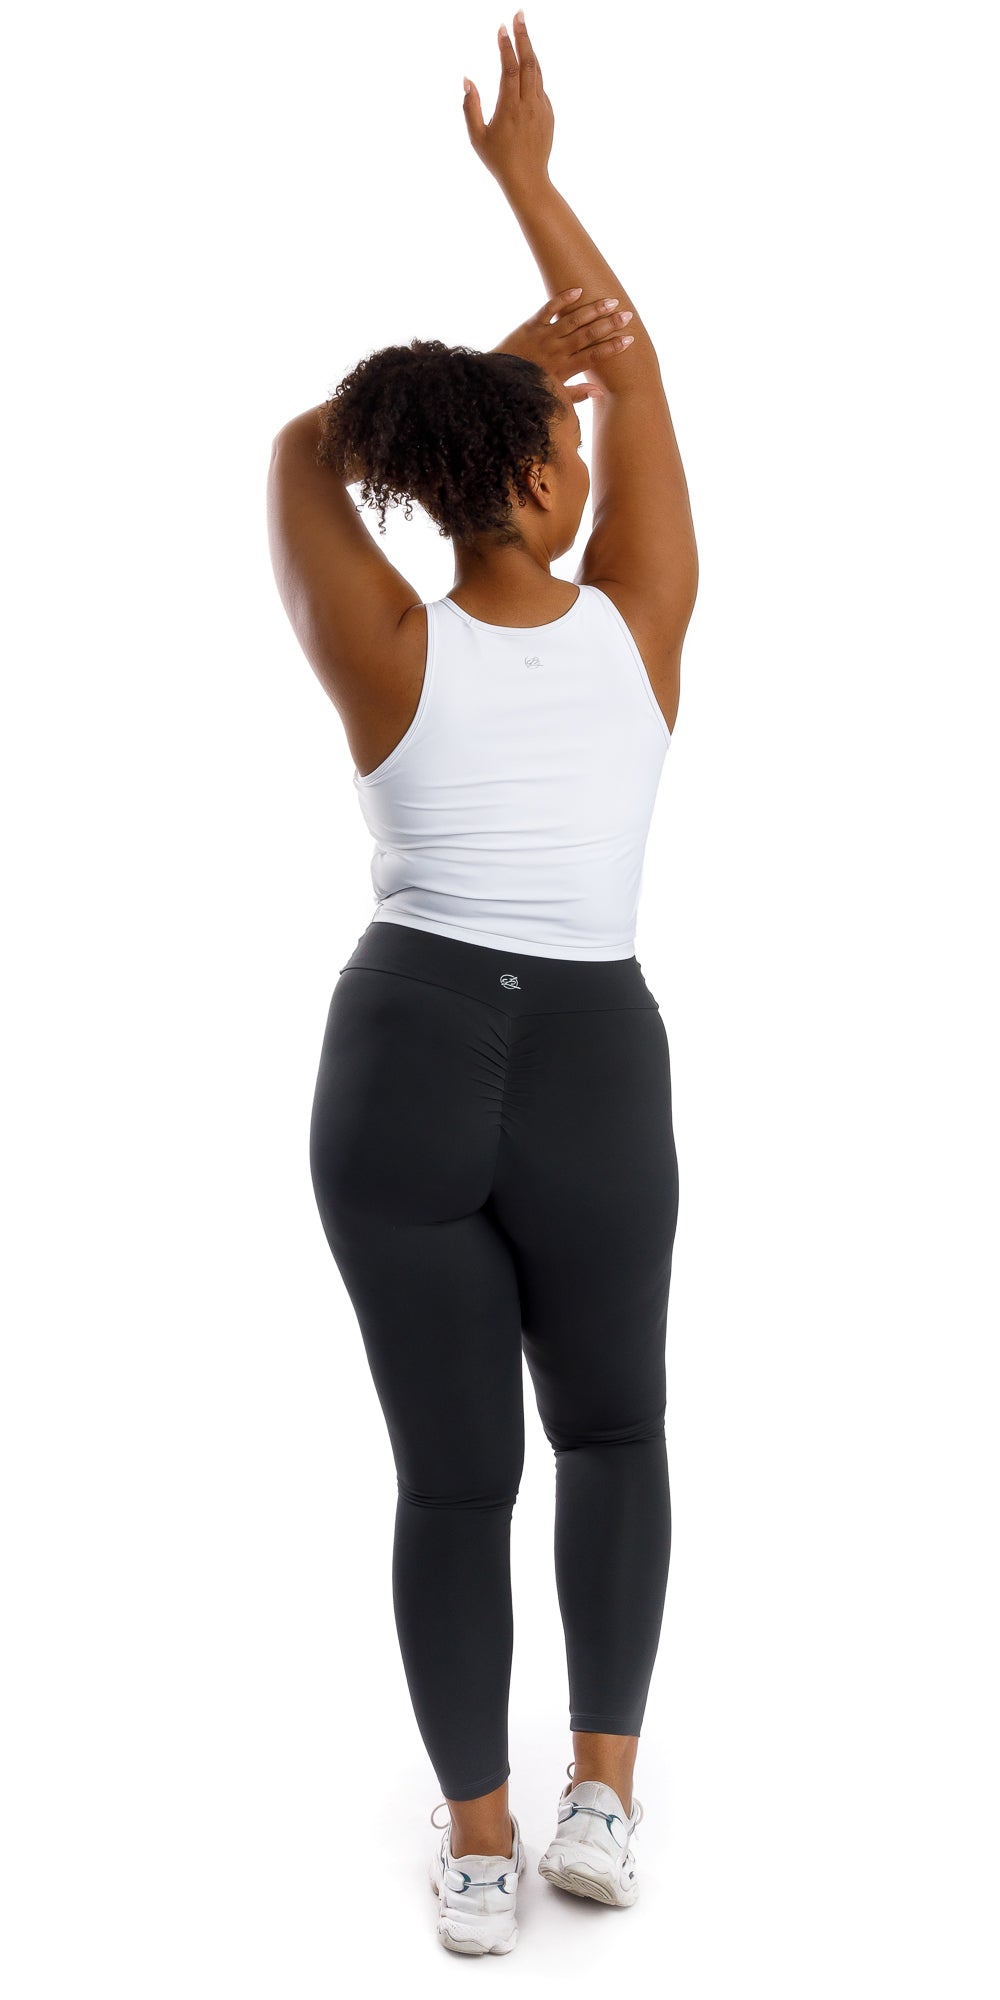 Full body back view of lady in sleeveless White Crop Top and black leggings lifting right heel and raising both arms with one all the way up while folding the other